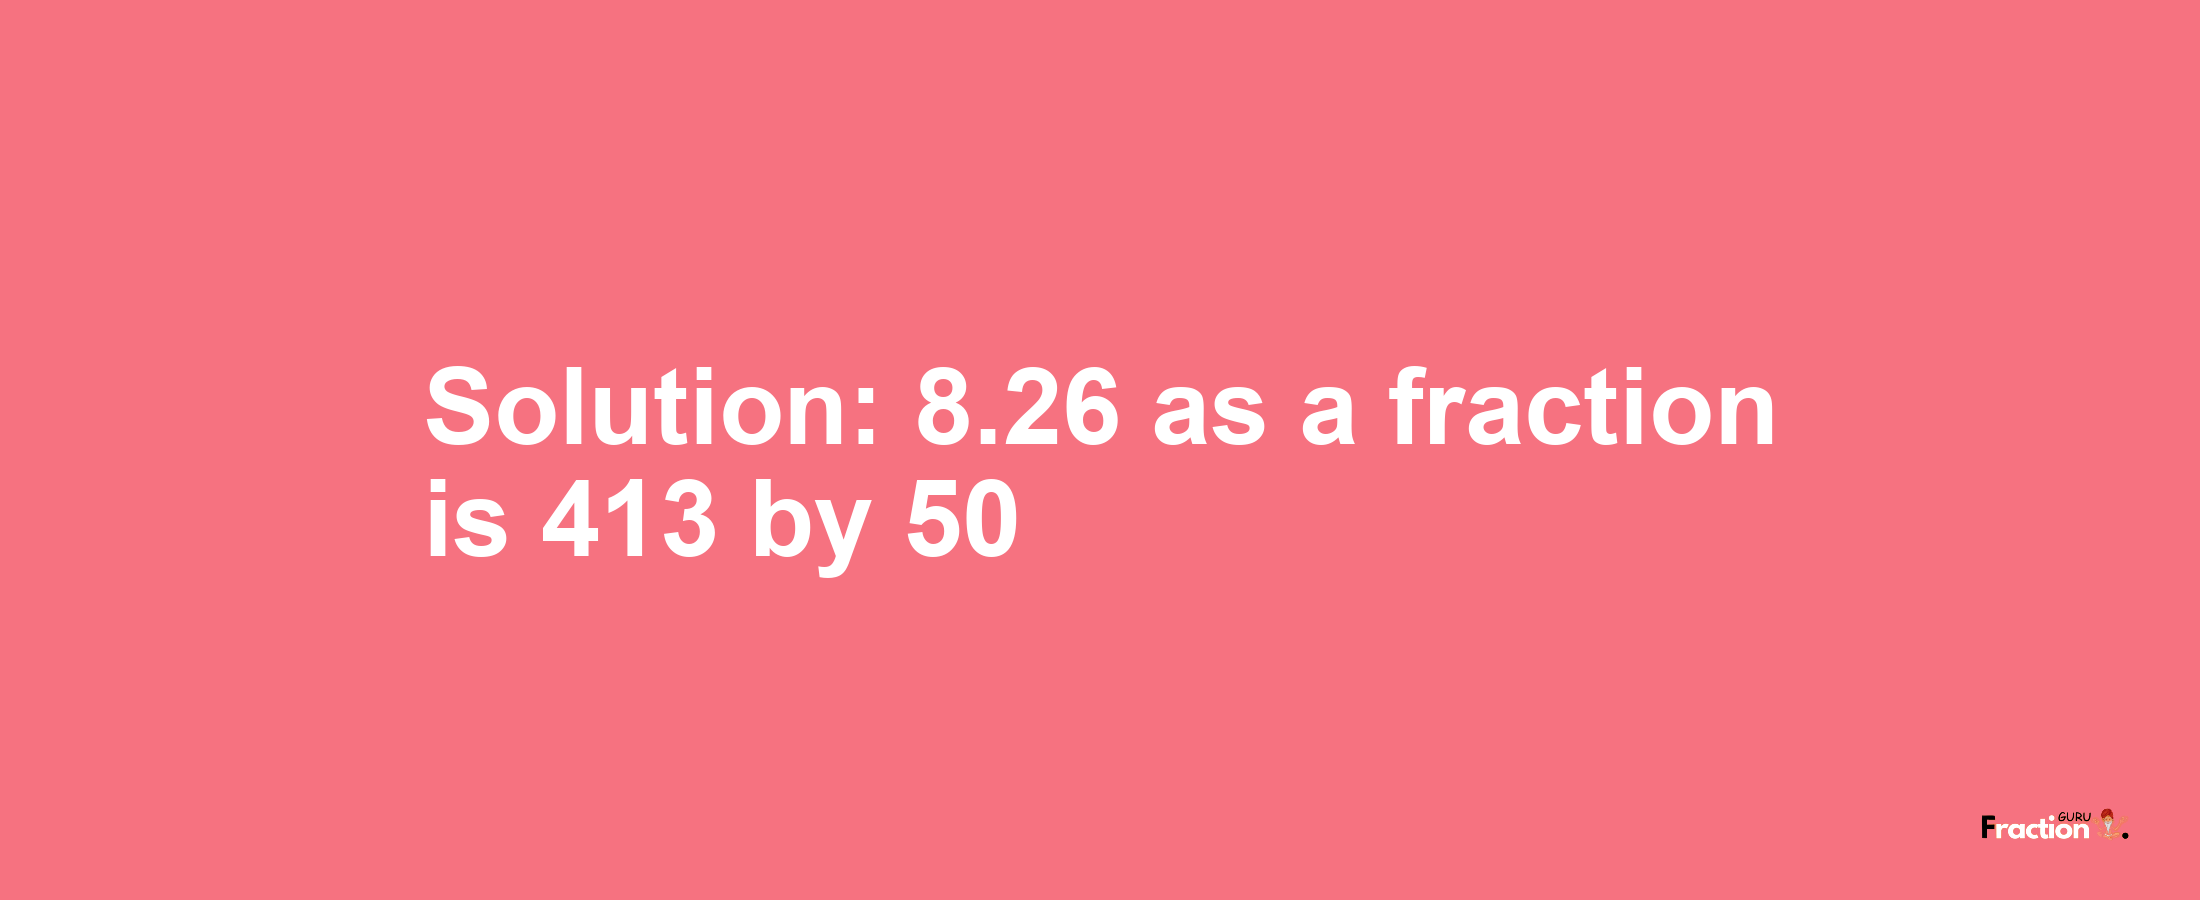 Solution:8.26 as a fraction is 413/50